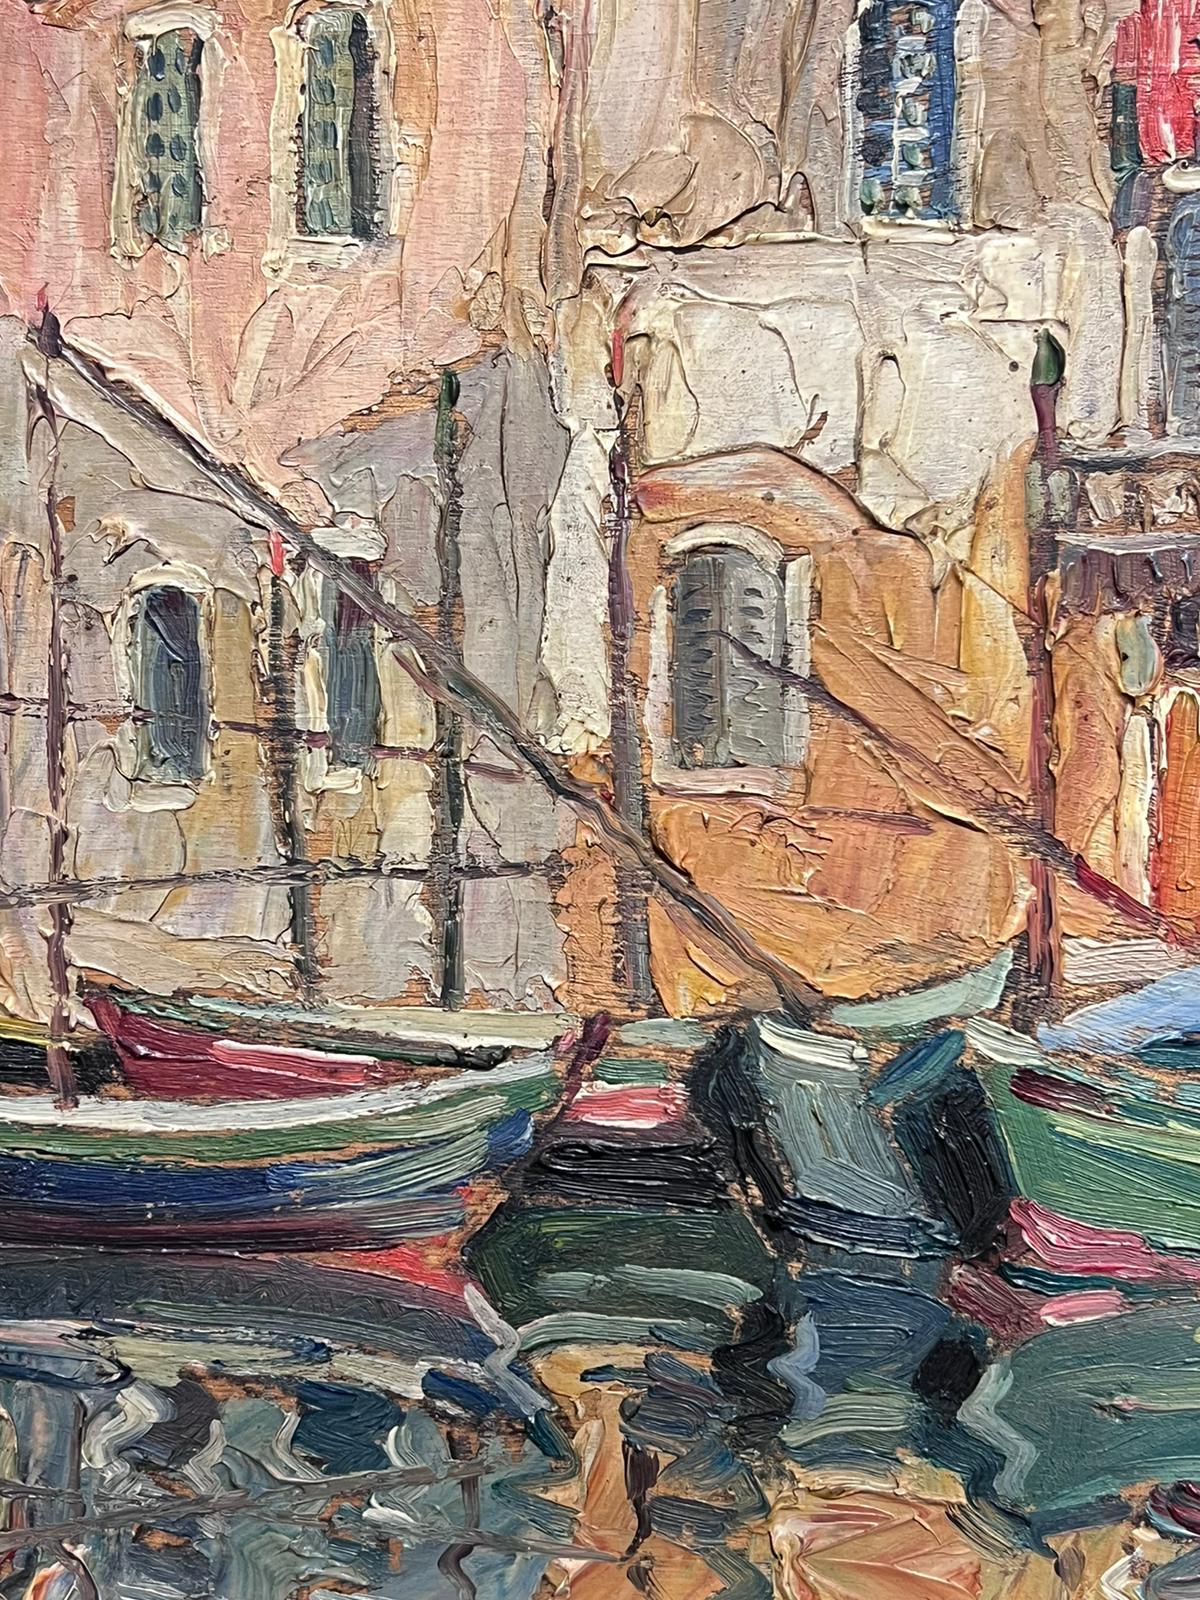 St. Tropez Harbor
French Impressionist 1950's
oil on board, framed
framed: 15 x 20.5 inches
board: 12.5 x 18 inches
provenance: private collection, France
condition: overall good and sound condition